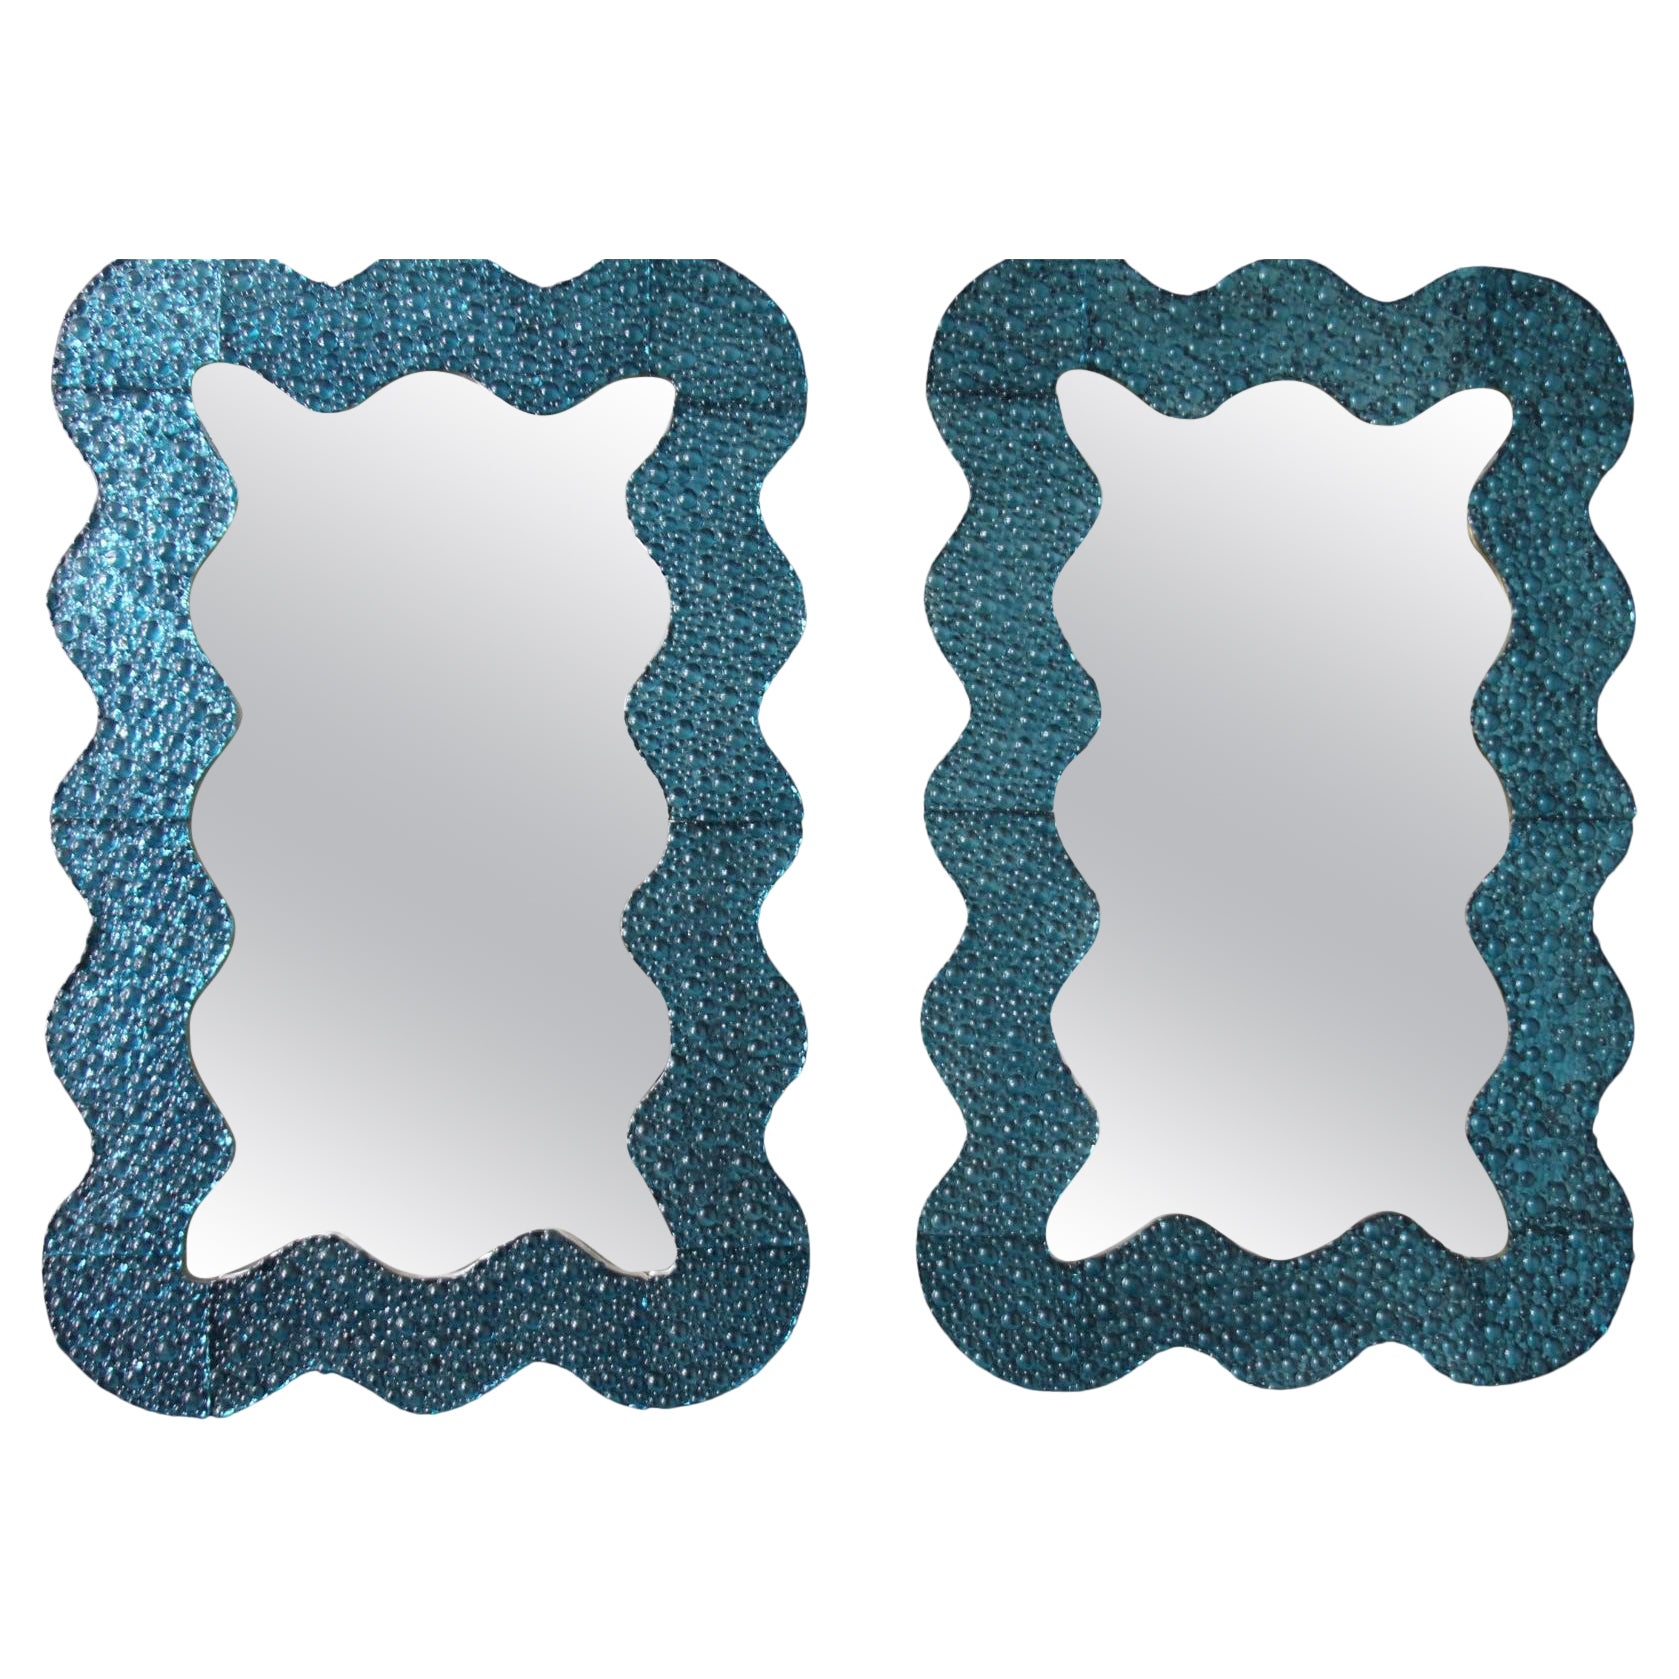 Large Wavy Turquoise Blue Textured Murano Glass Mirrors , In Stock For Sale